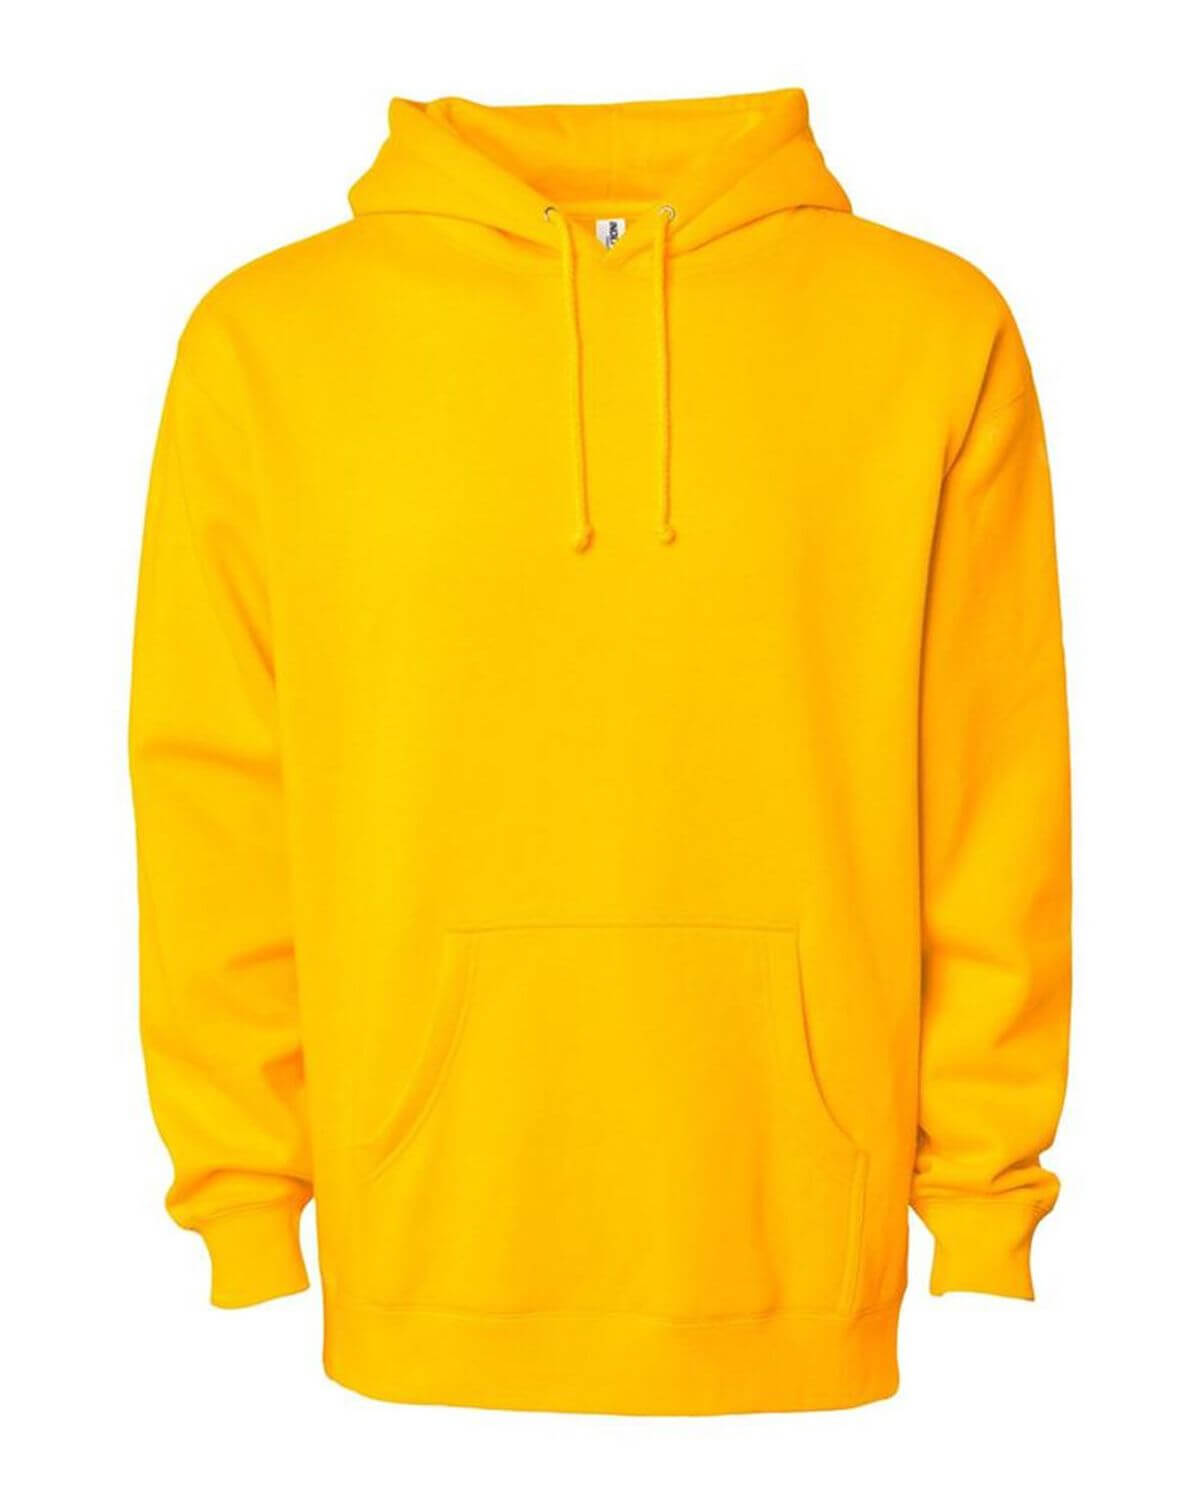 ApparelBus - Independent Trading Co. IND4000 Heavyweight Hooded